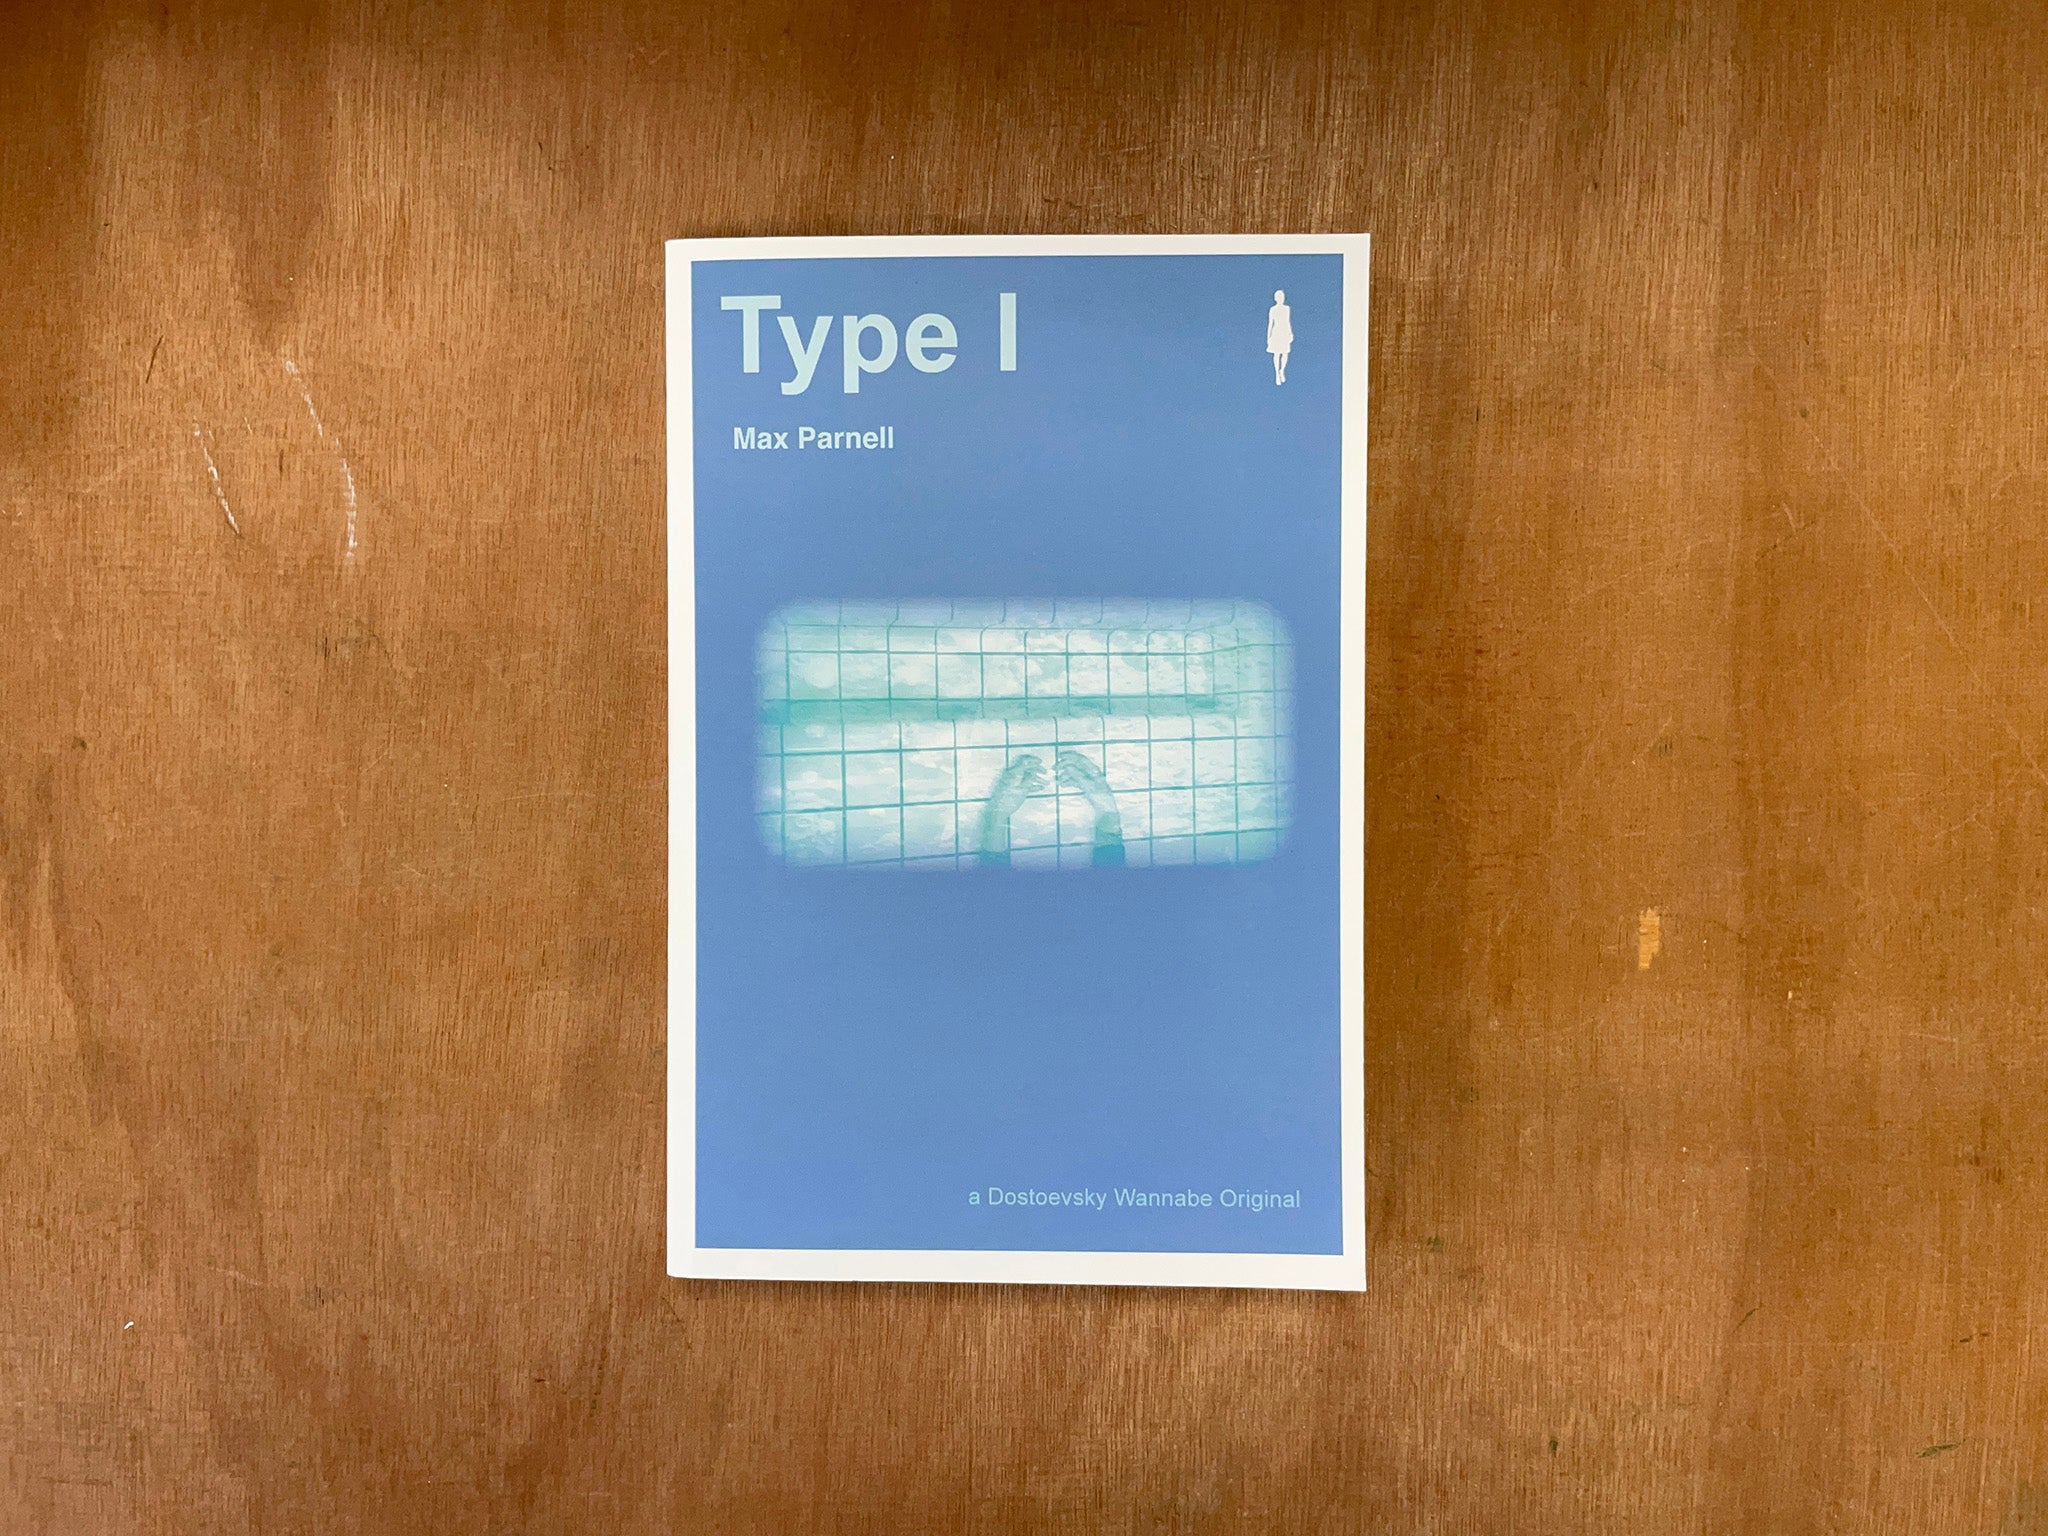 TYPE I by Max Parnell